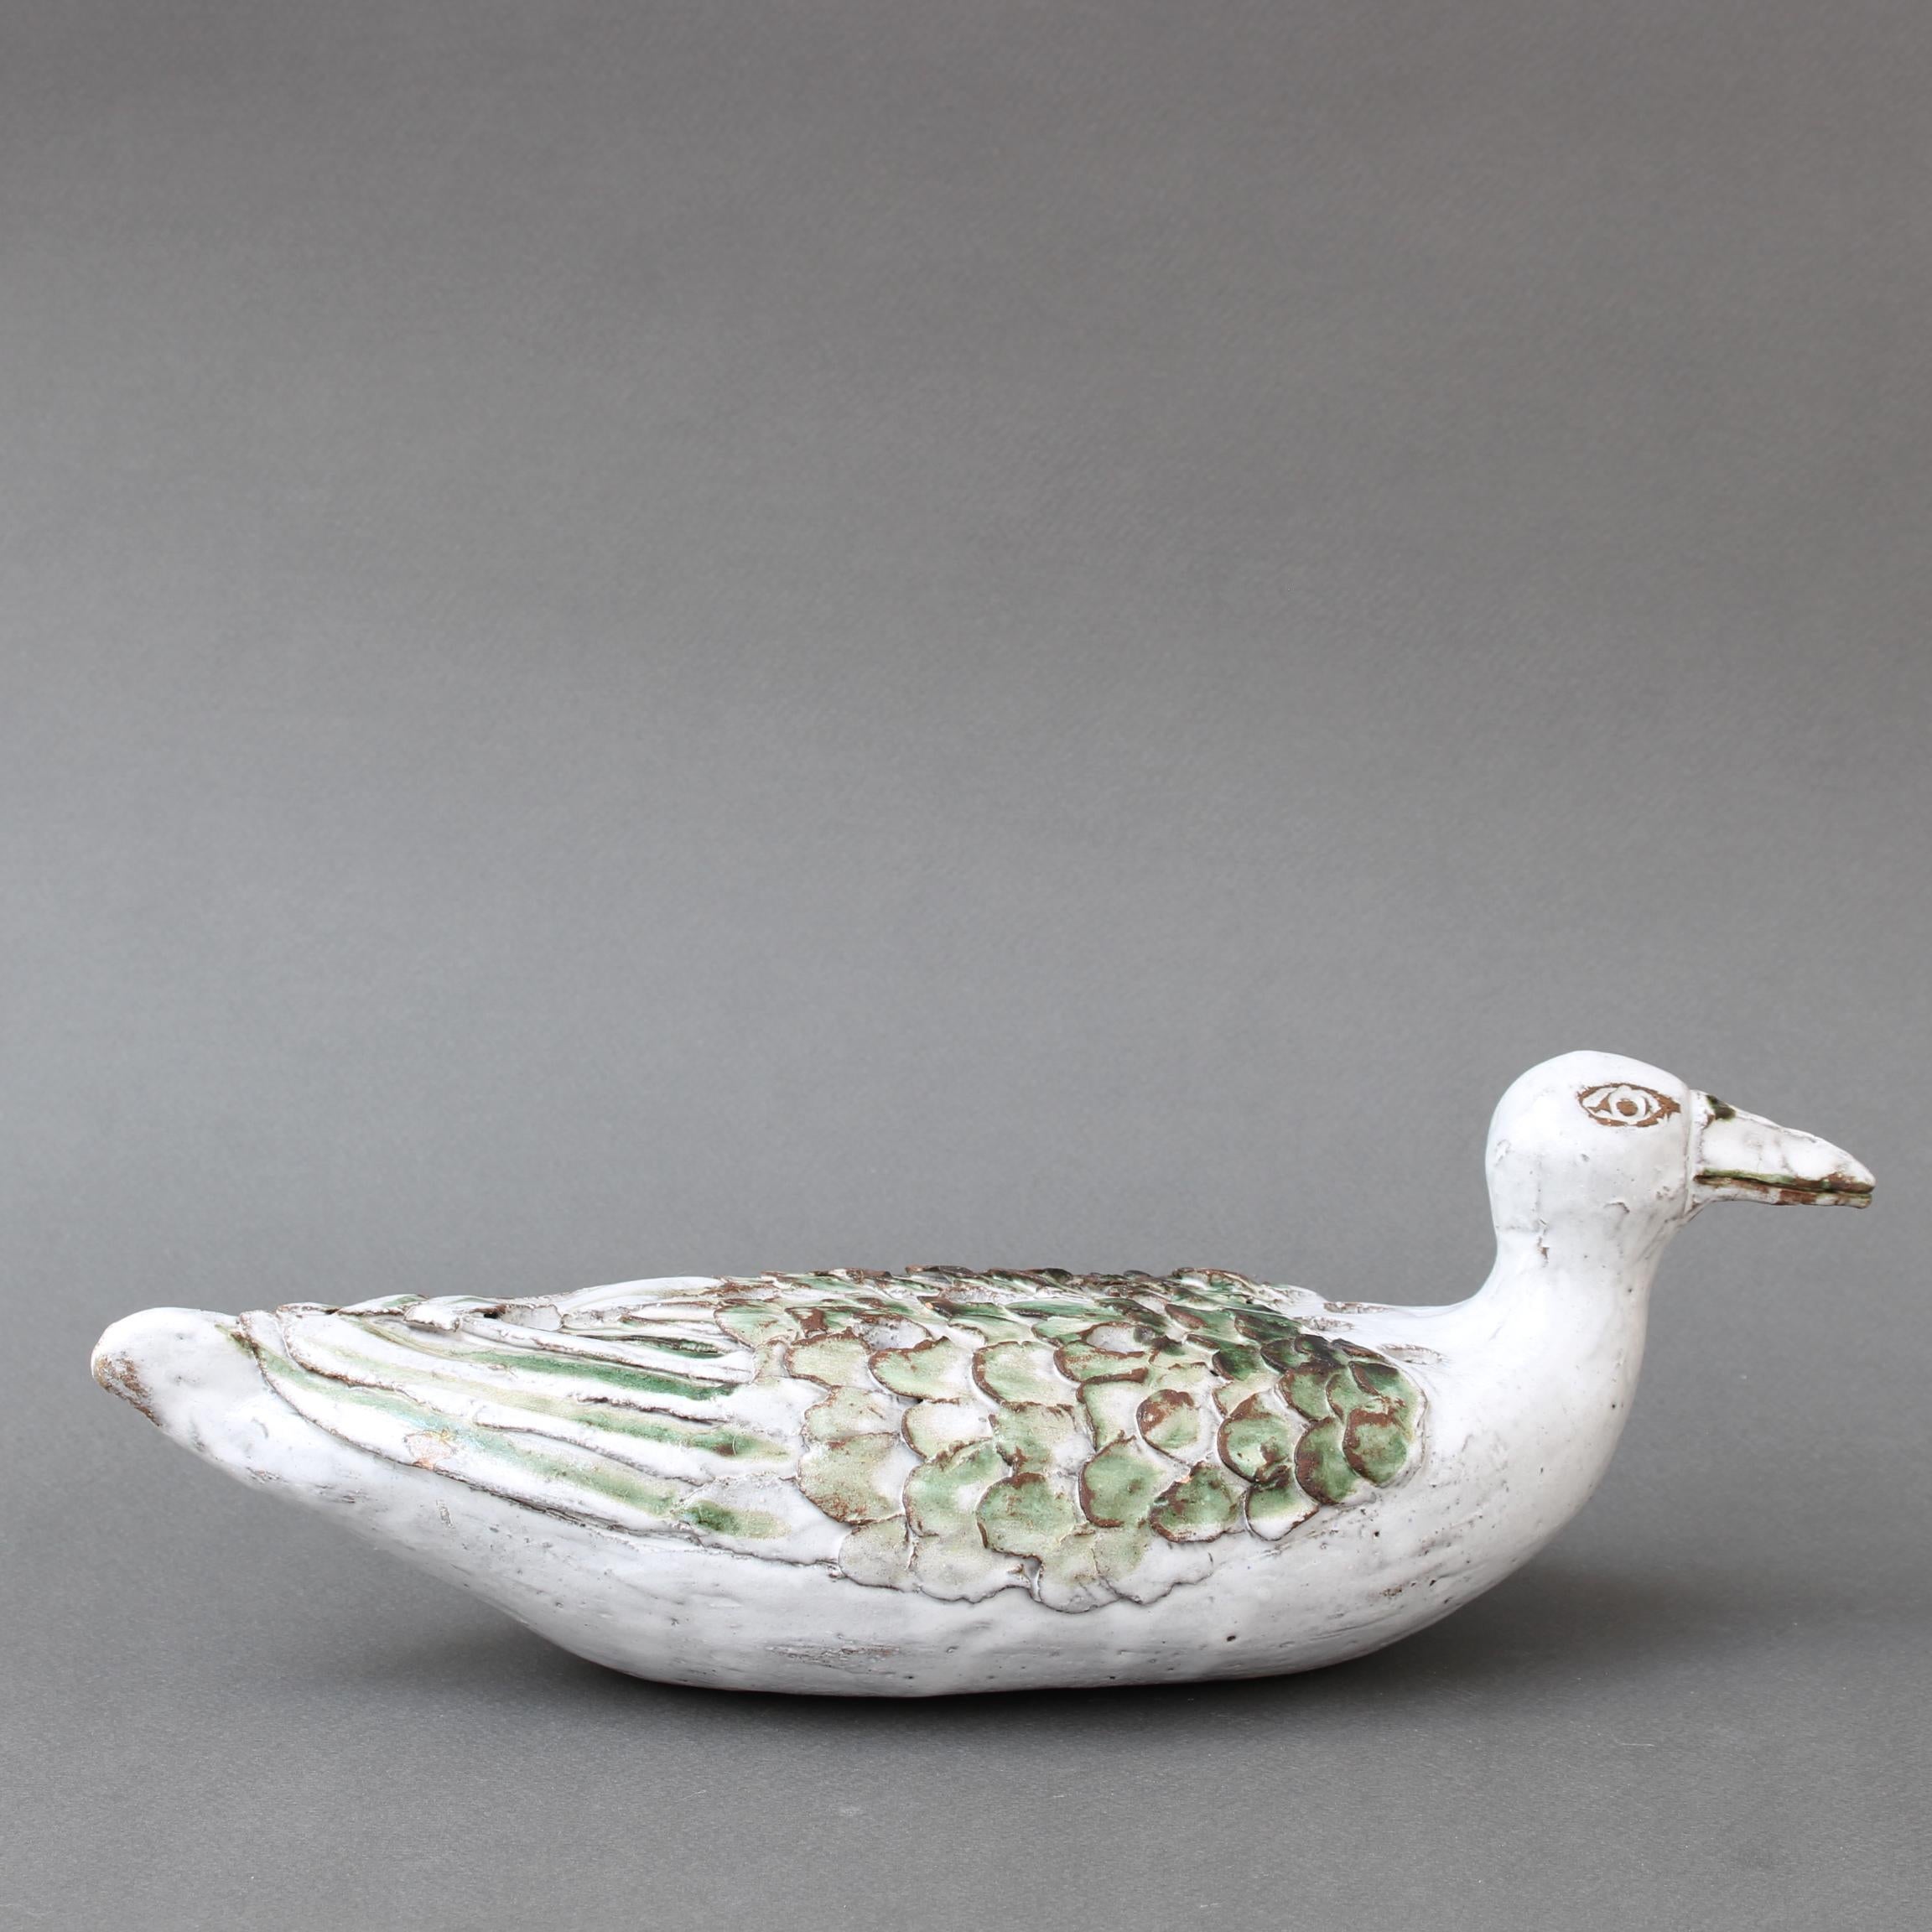 French ceramic duck flower vase (1994) by Albert Thiry. A creamy-white glaze contrasts with a delicate green which progresses in intensity on the piece's wings. The markings and colouring are quintessential Albert Thiry. The individual flower holes